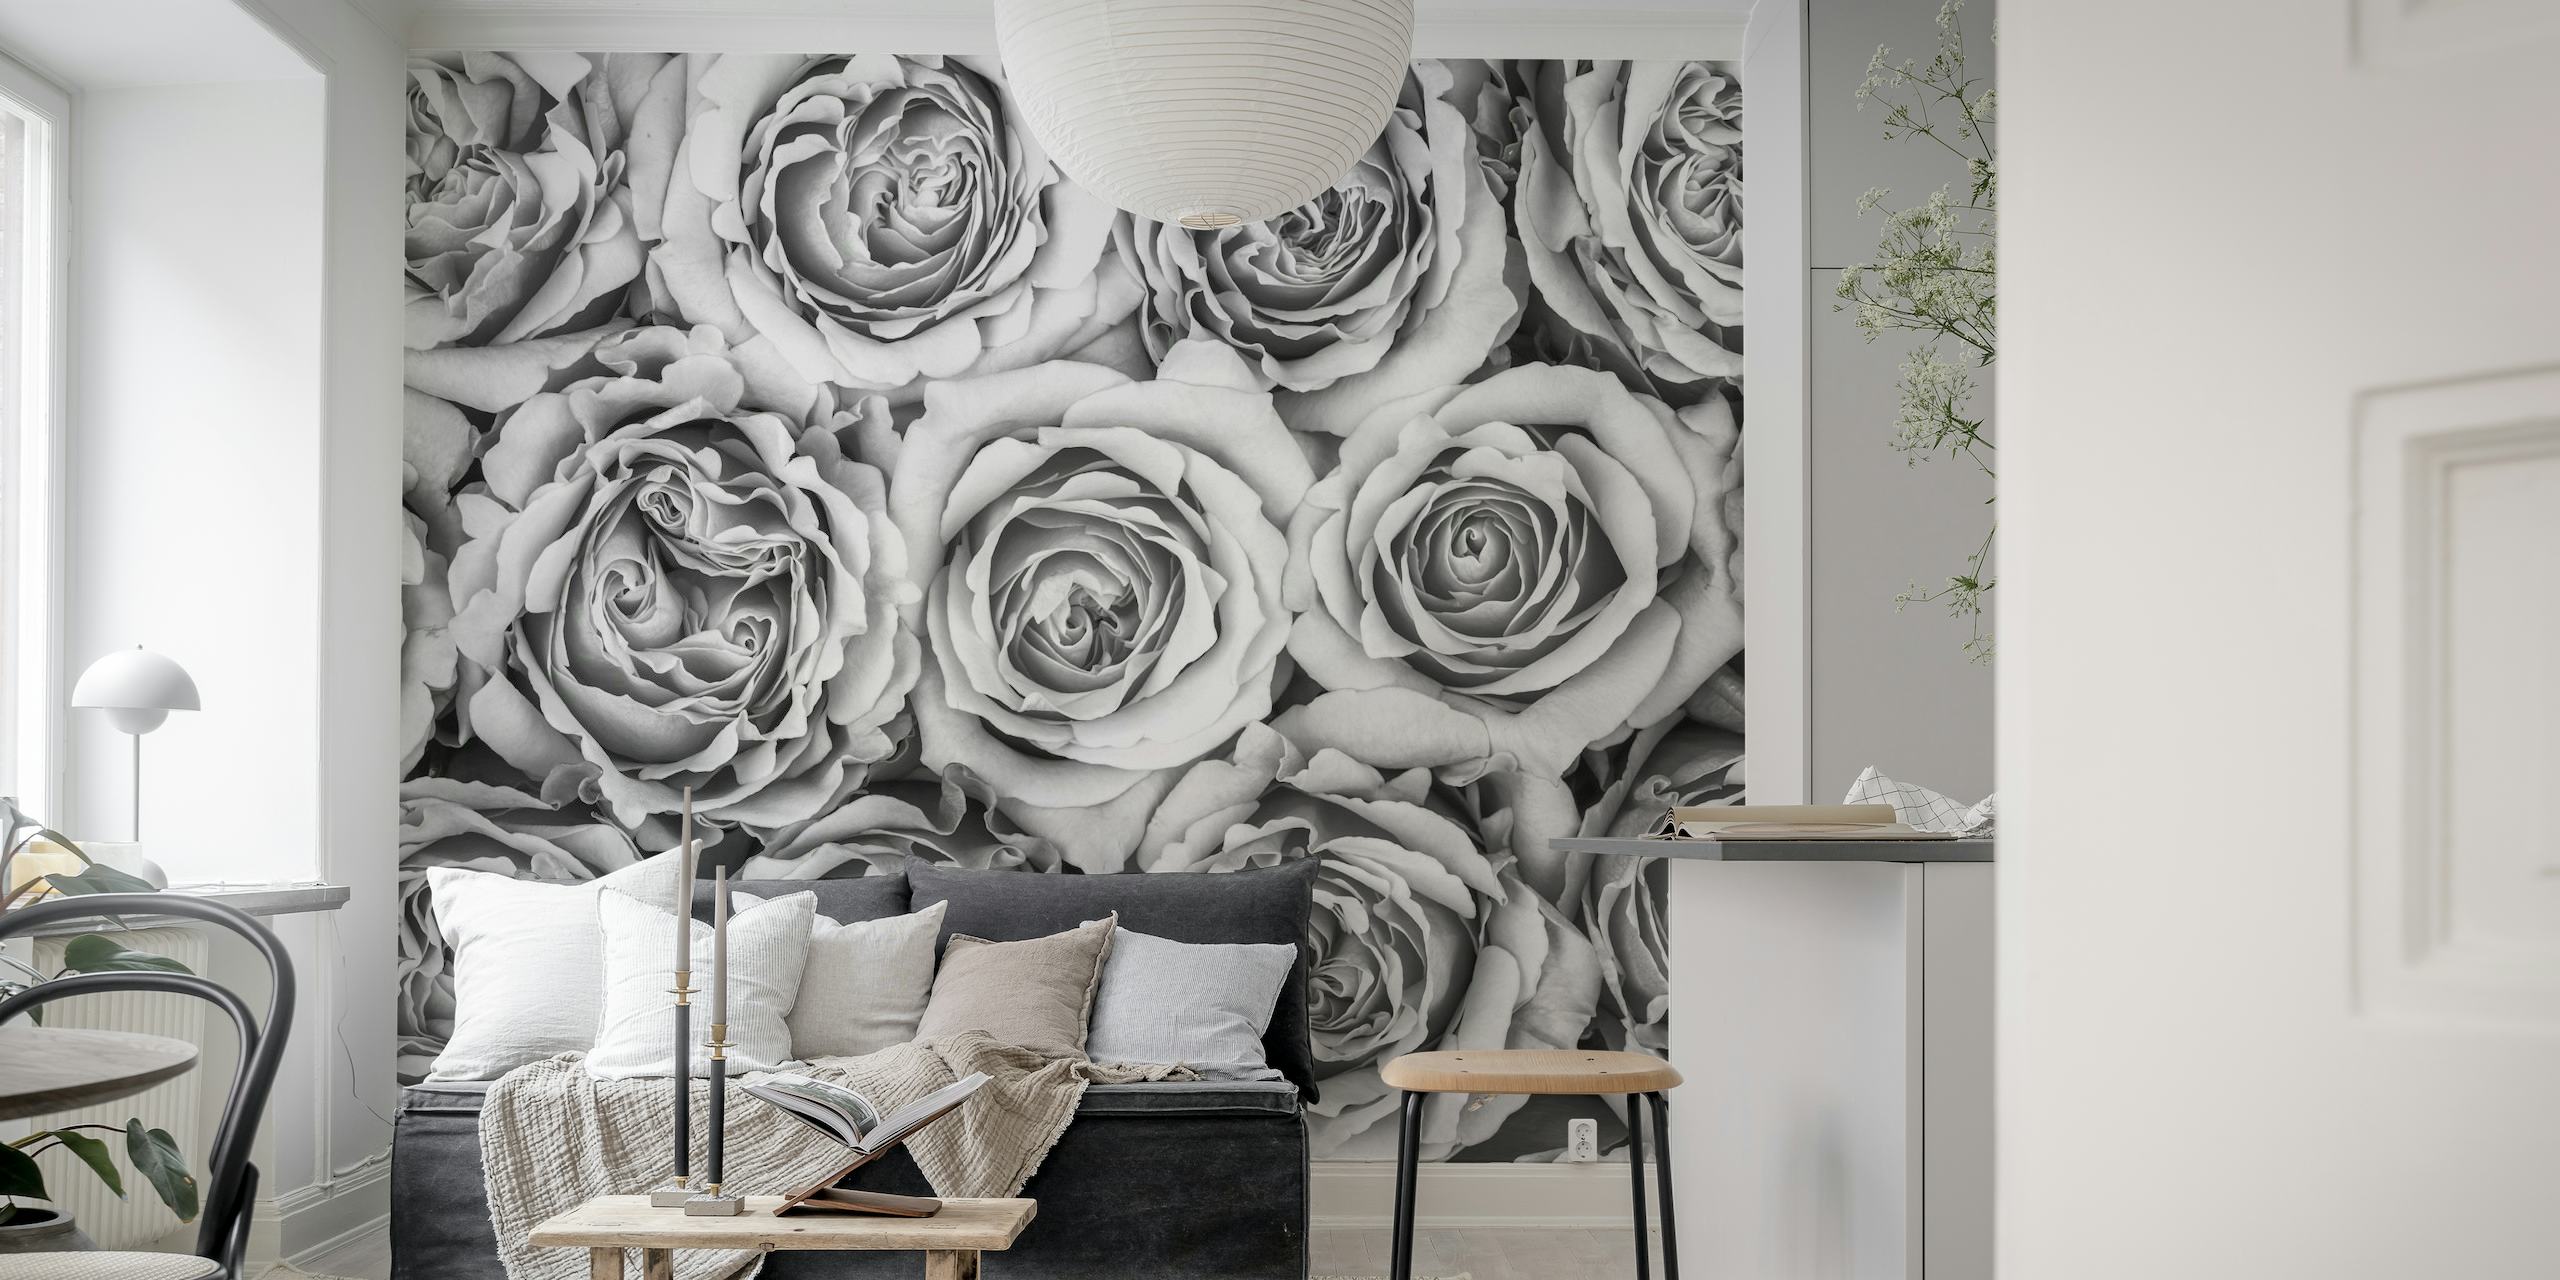 Background of roses behang